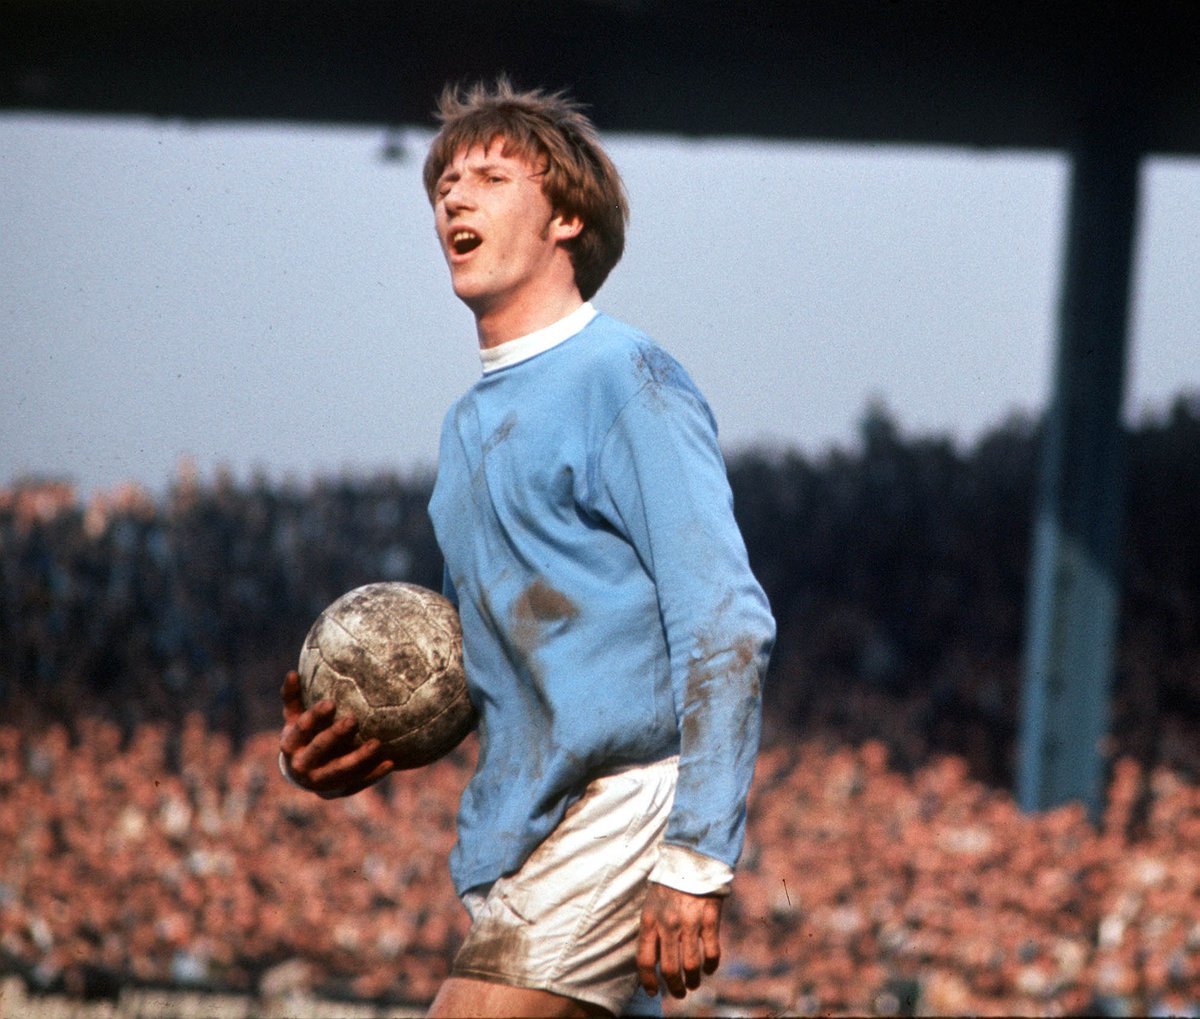 The next season (1967/68), City began to challenge for the title against their city rivals Manchester United Bell scored 14 goals again, and recorded an assist in the final day 4-3 title decider against Newcastle United, which won City their first league title in 31 years